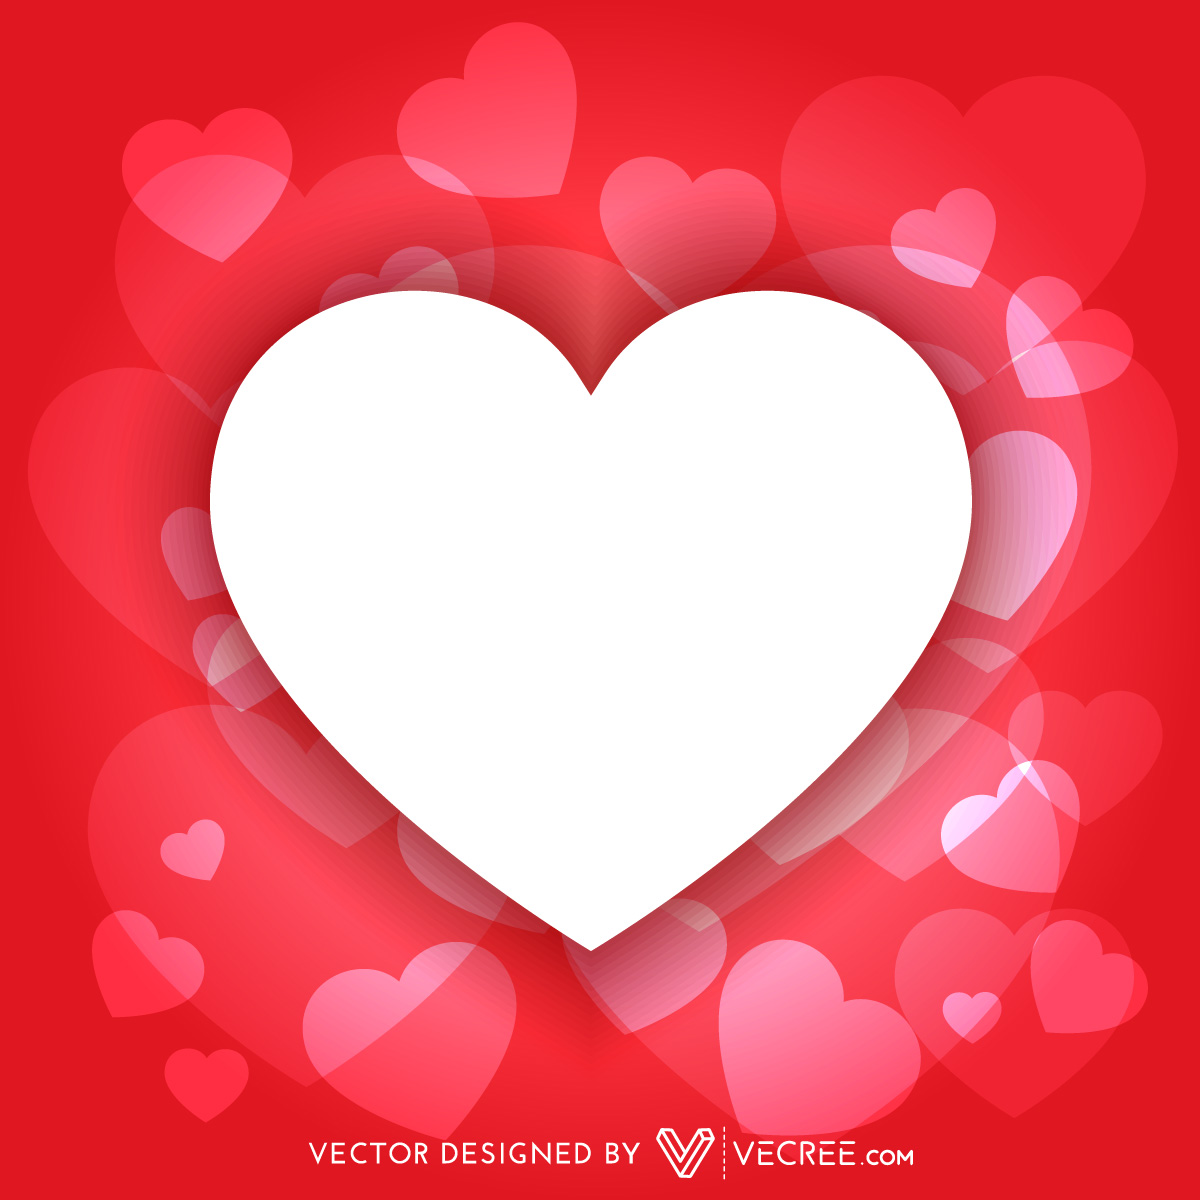 Simple Valentine Day Heart Templates